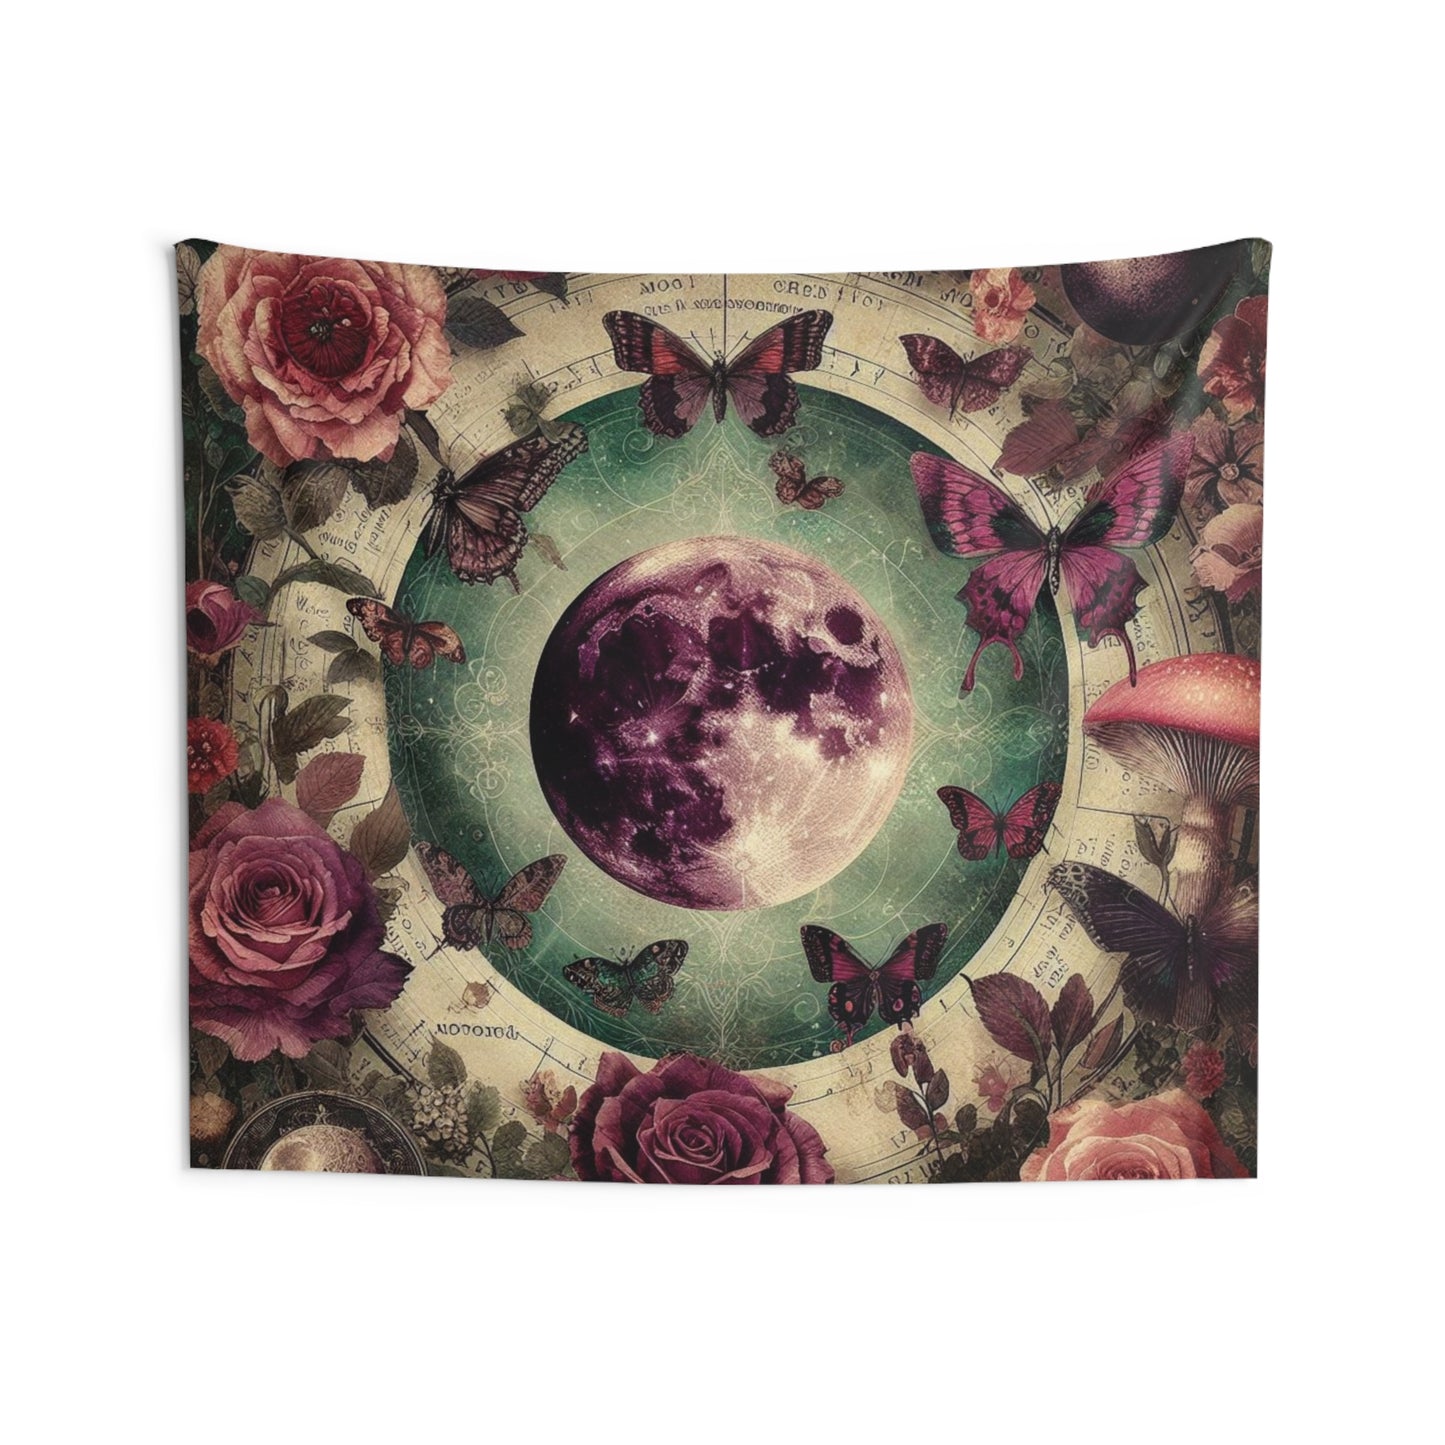 Tapestry, Large Celestial Tapestry with Whimsigoth Aesthetic, Floral Boho Tapestry for Dark Cottagecore Decor